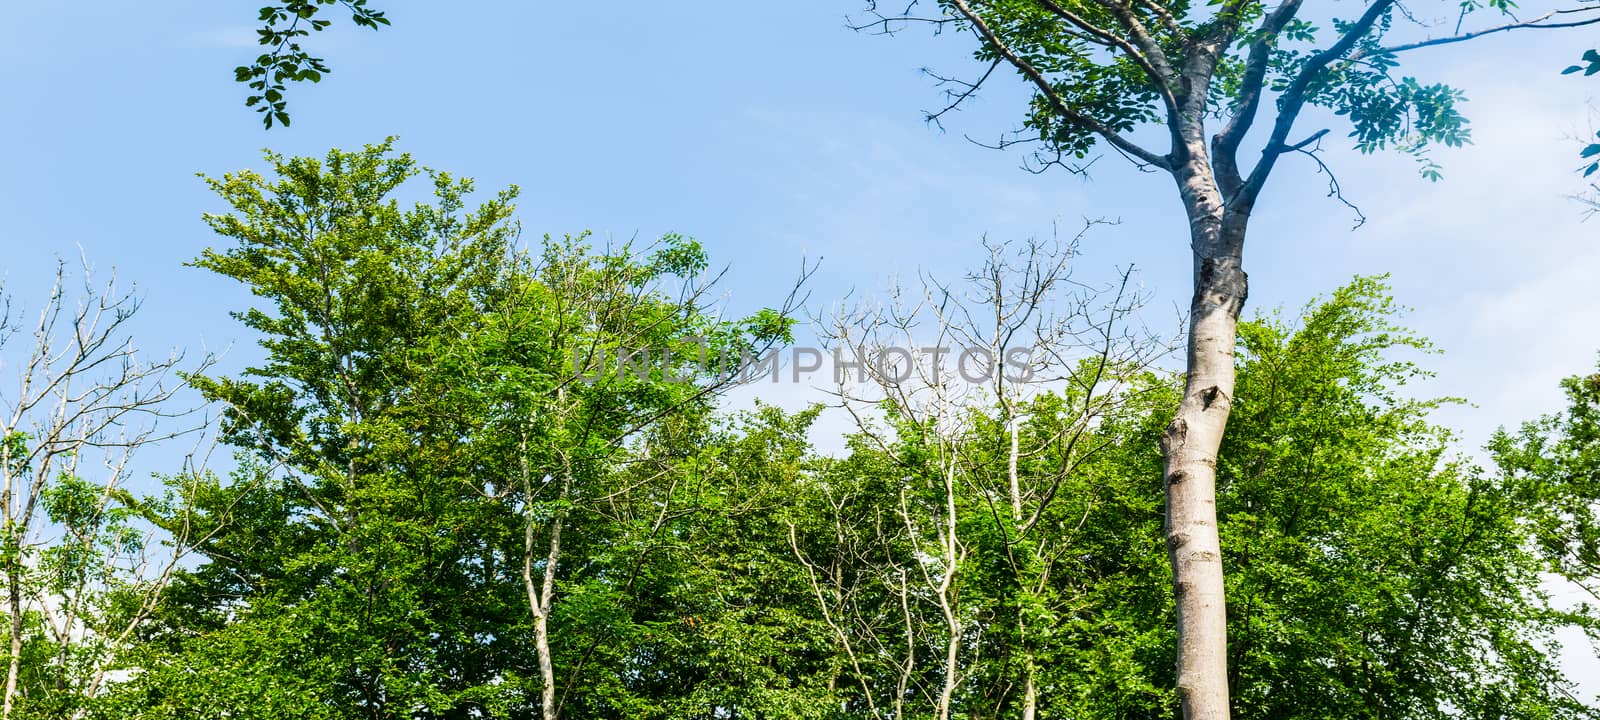 The tops of trees in forest against blue sky with clouds background